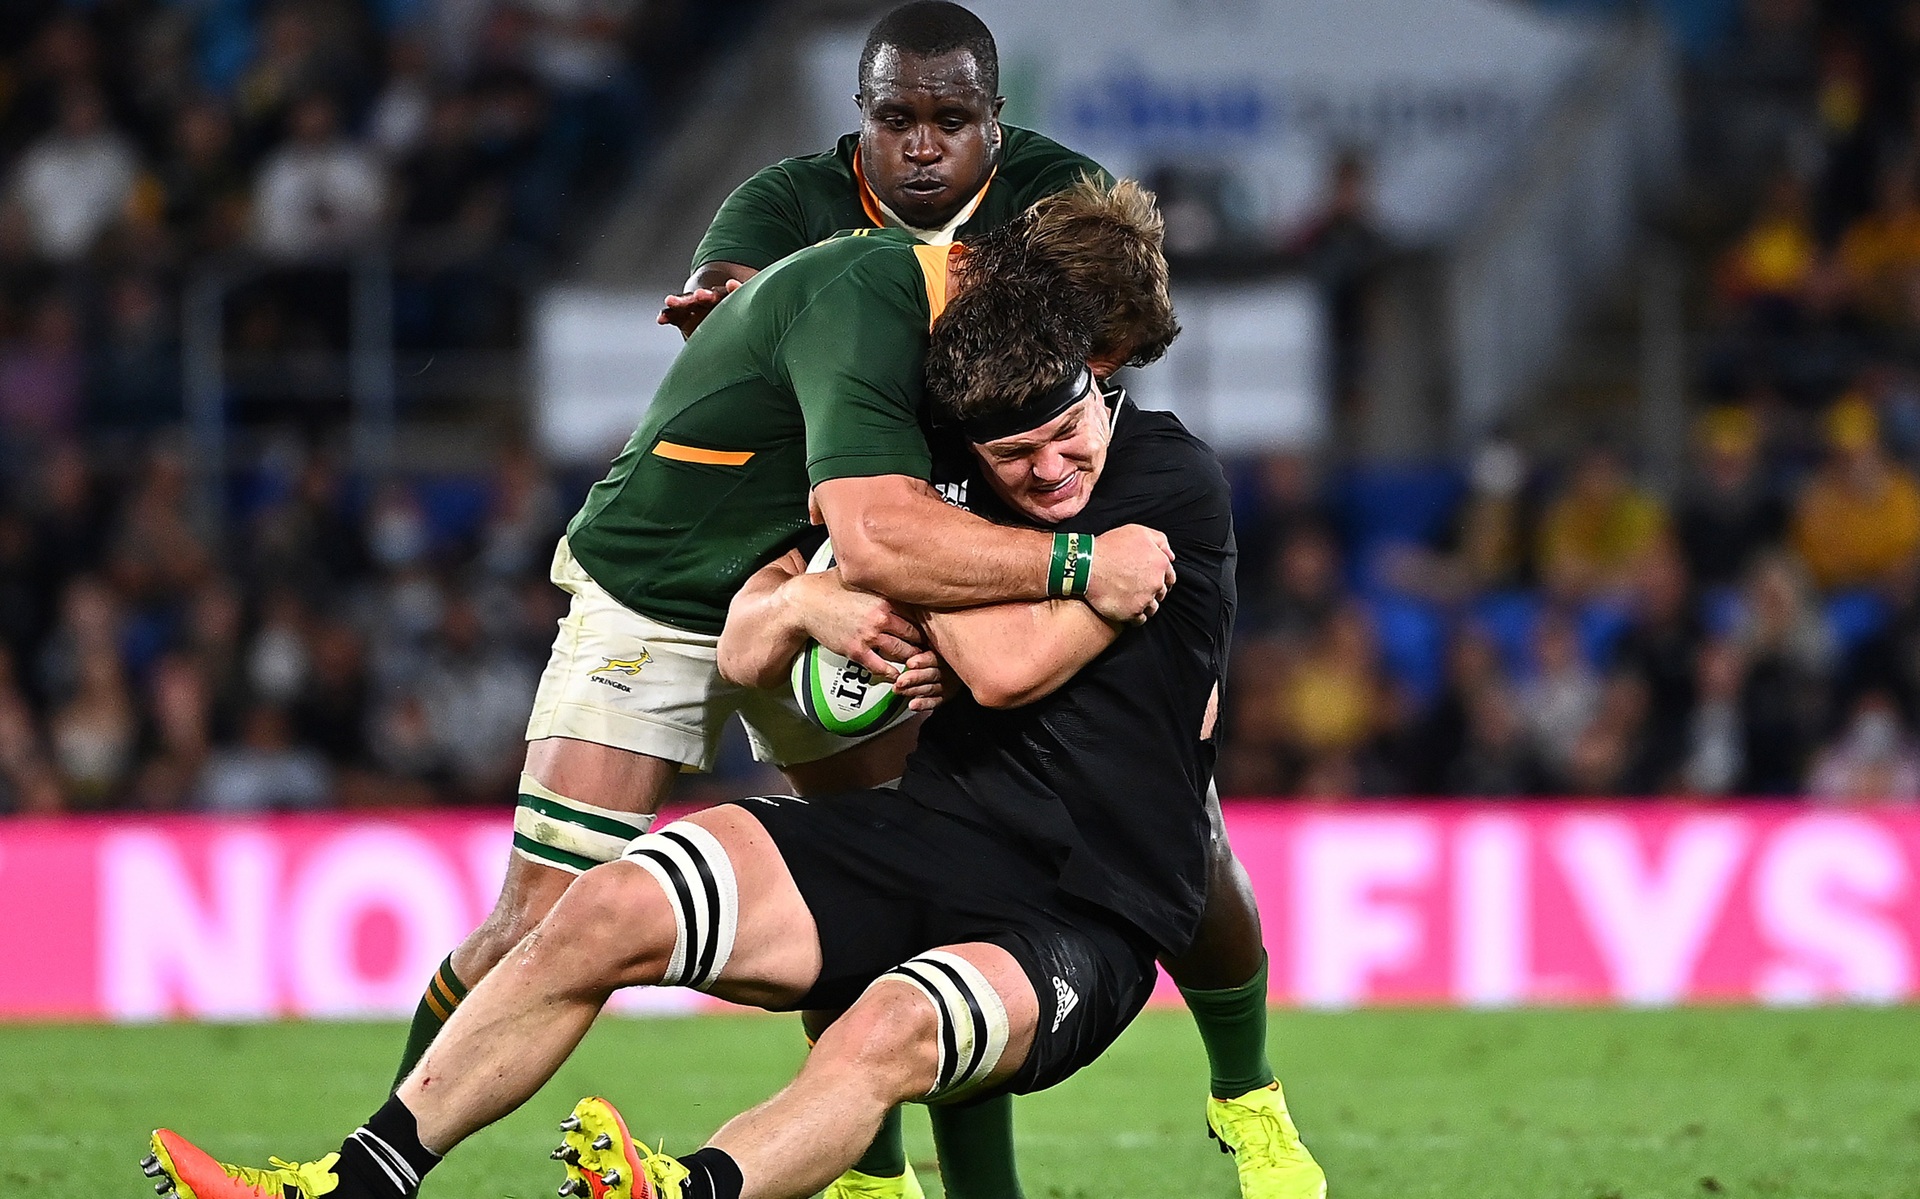 All Blacks v Springboks rugby Kick-off time, live streaming, how to watch in NZ, teams - all you need to know